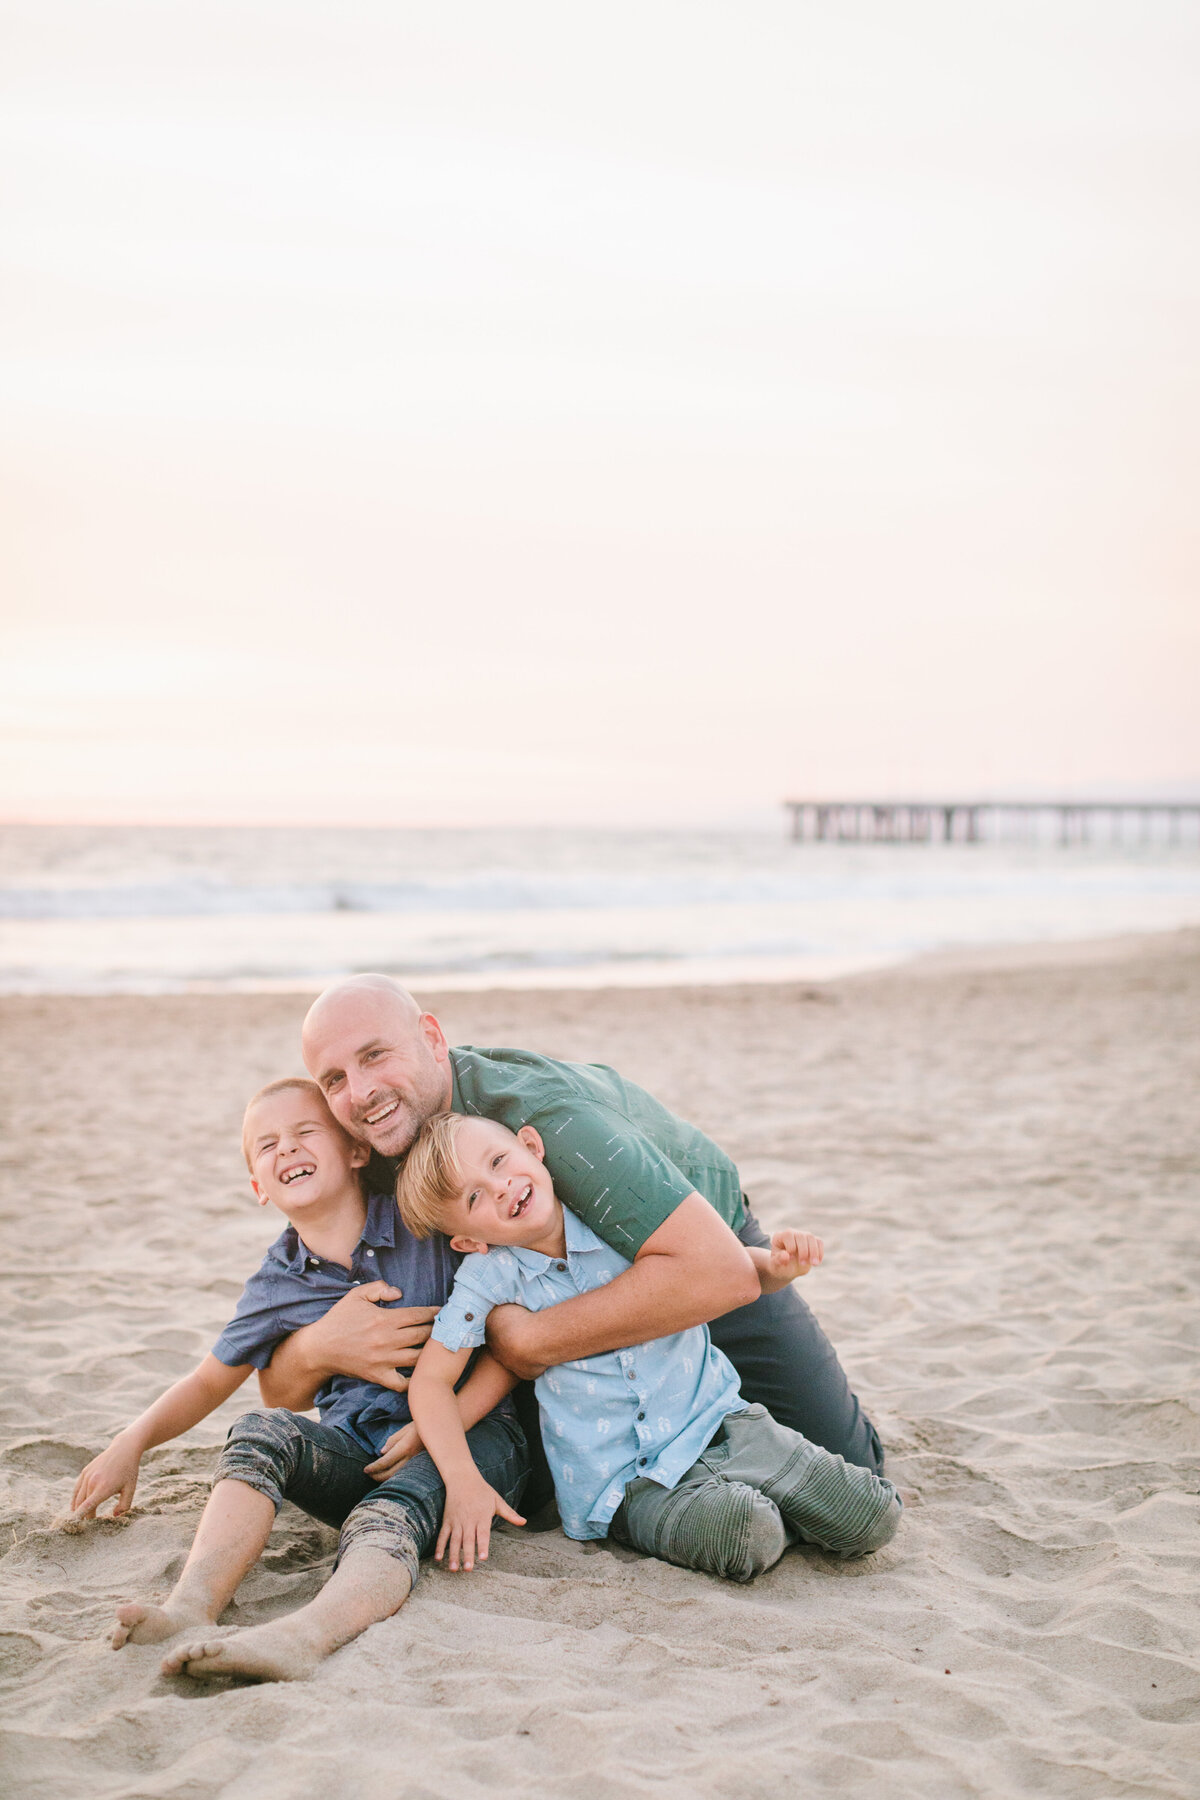 Best California and Texas Family Photographer-Jodee Debes Photography-40